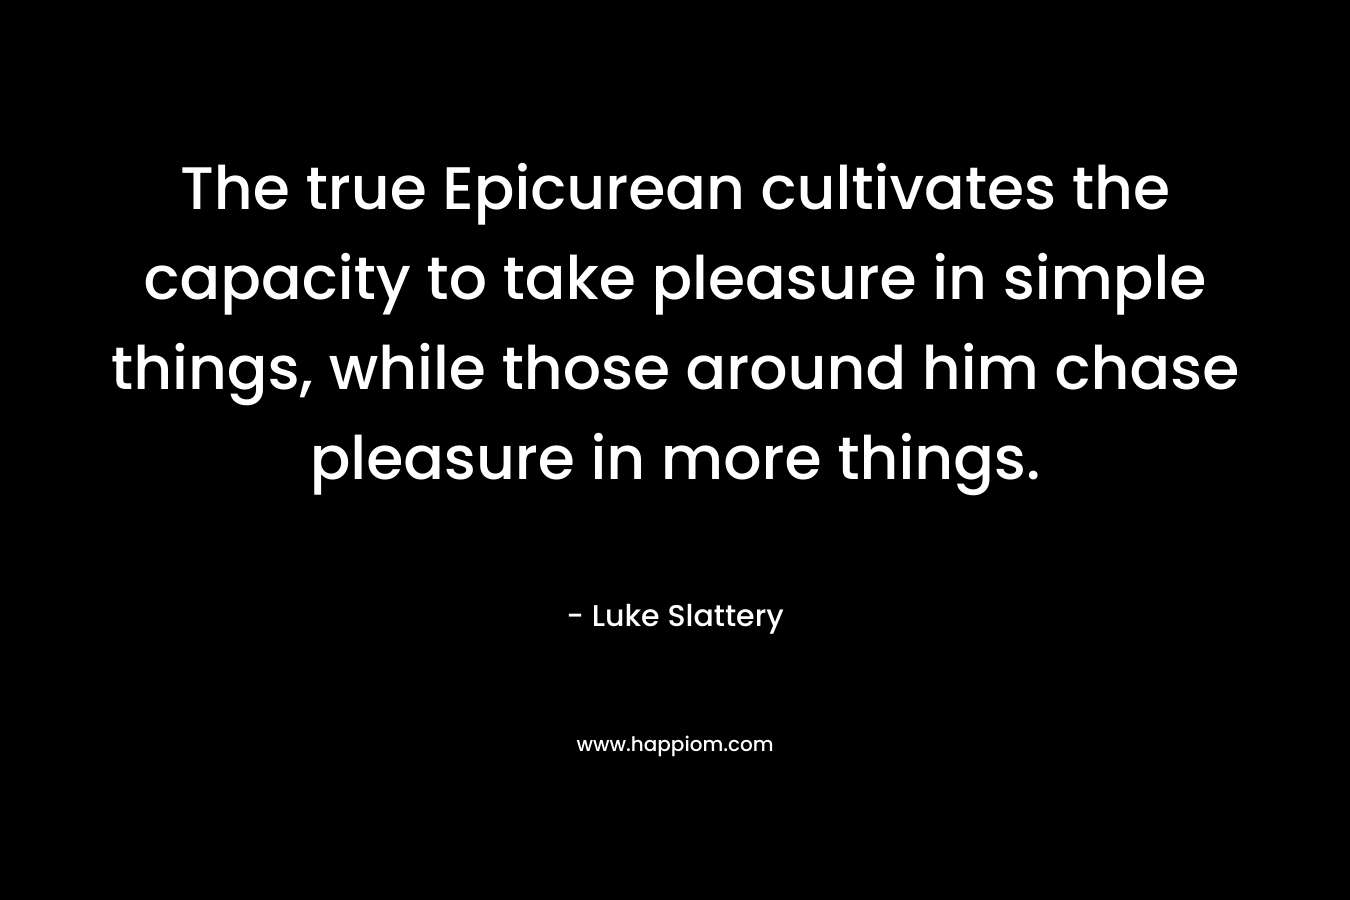 The true Epicurean cultivates the capacity to take pleasure in simple things, while those around him chase pleasure in more things.